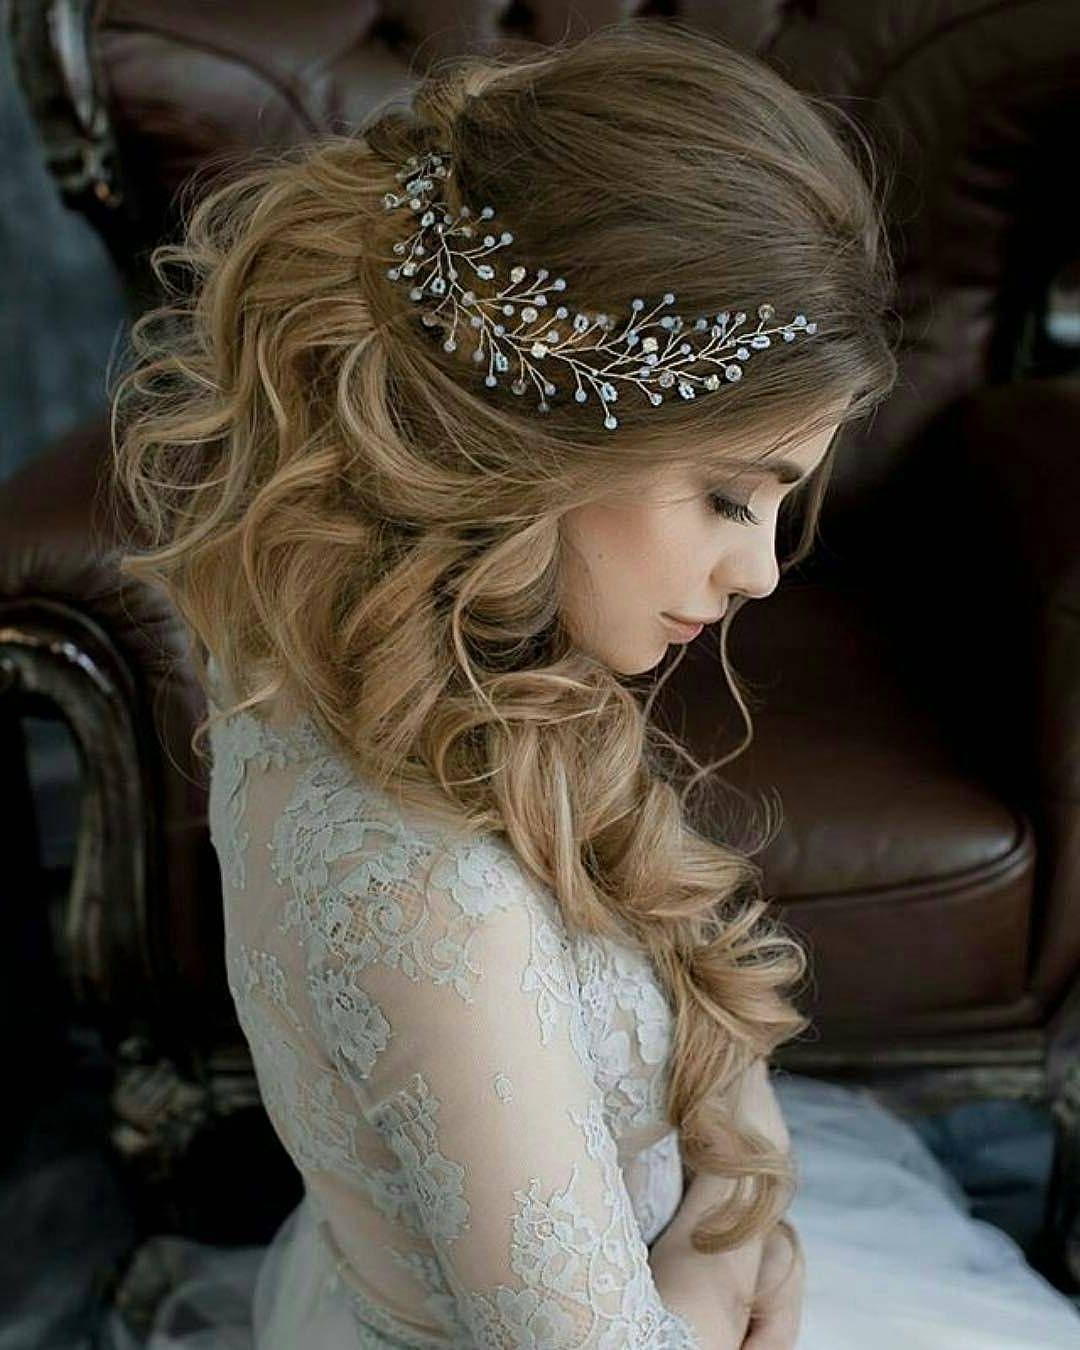 Well Liked Loose Curly Half Updo Wedding Hairstyles With Bouffant Throughout 10 Lavish Wedding Hairstyles For Long Hair – Wedding Hairstyle Ideas (Gallery 19 of 20)